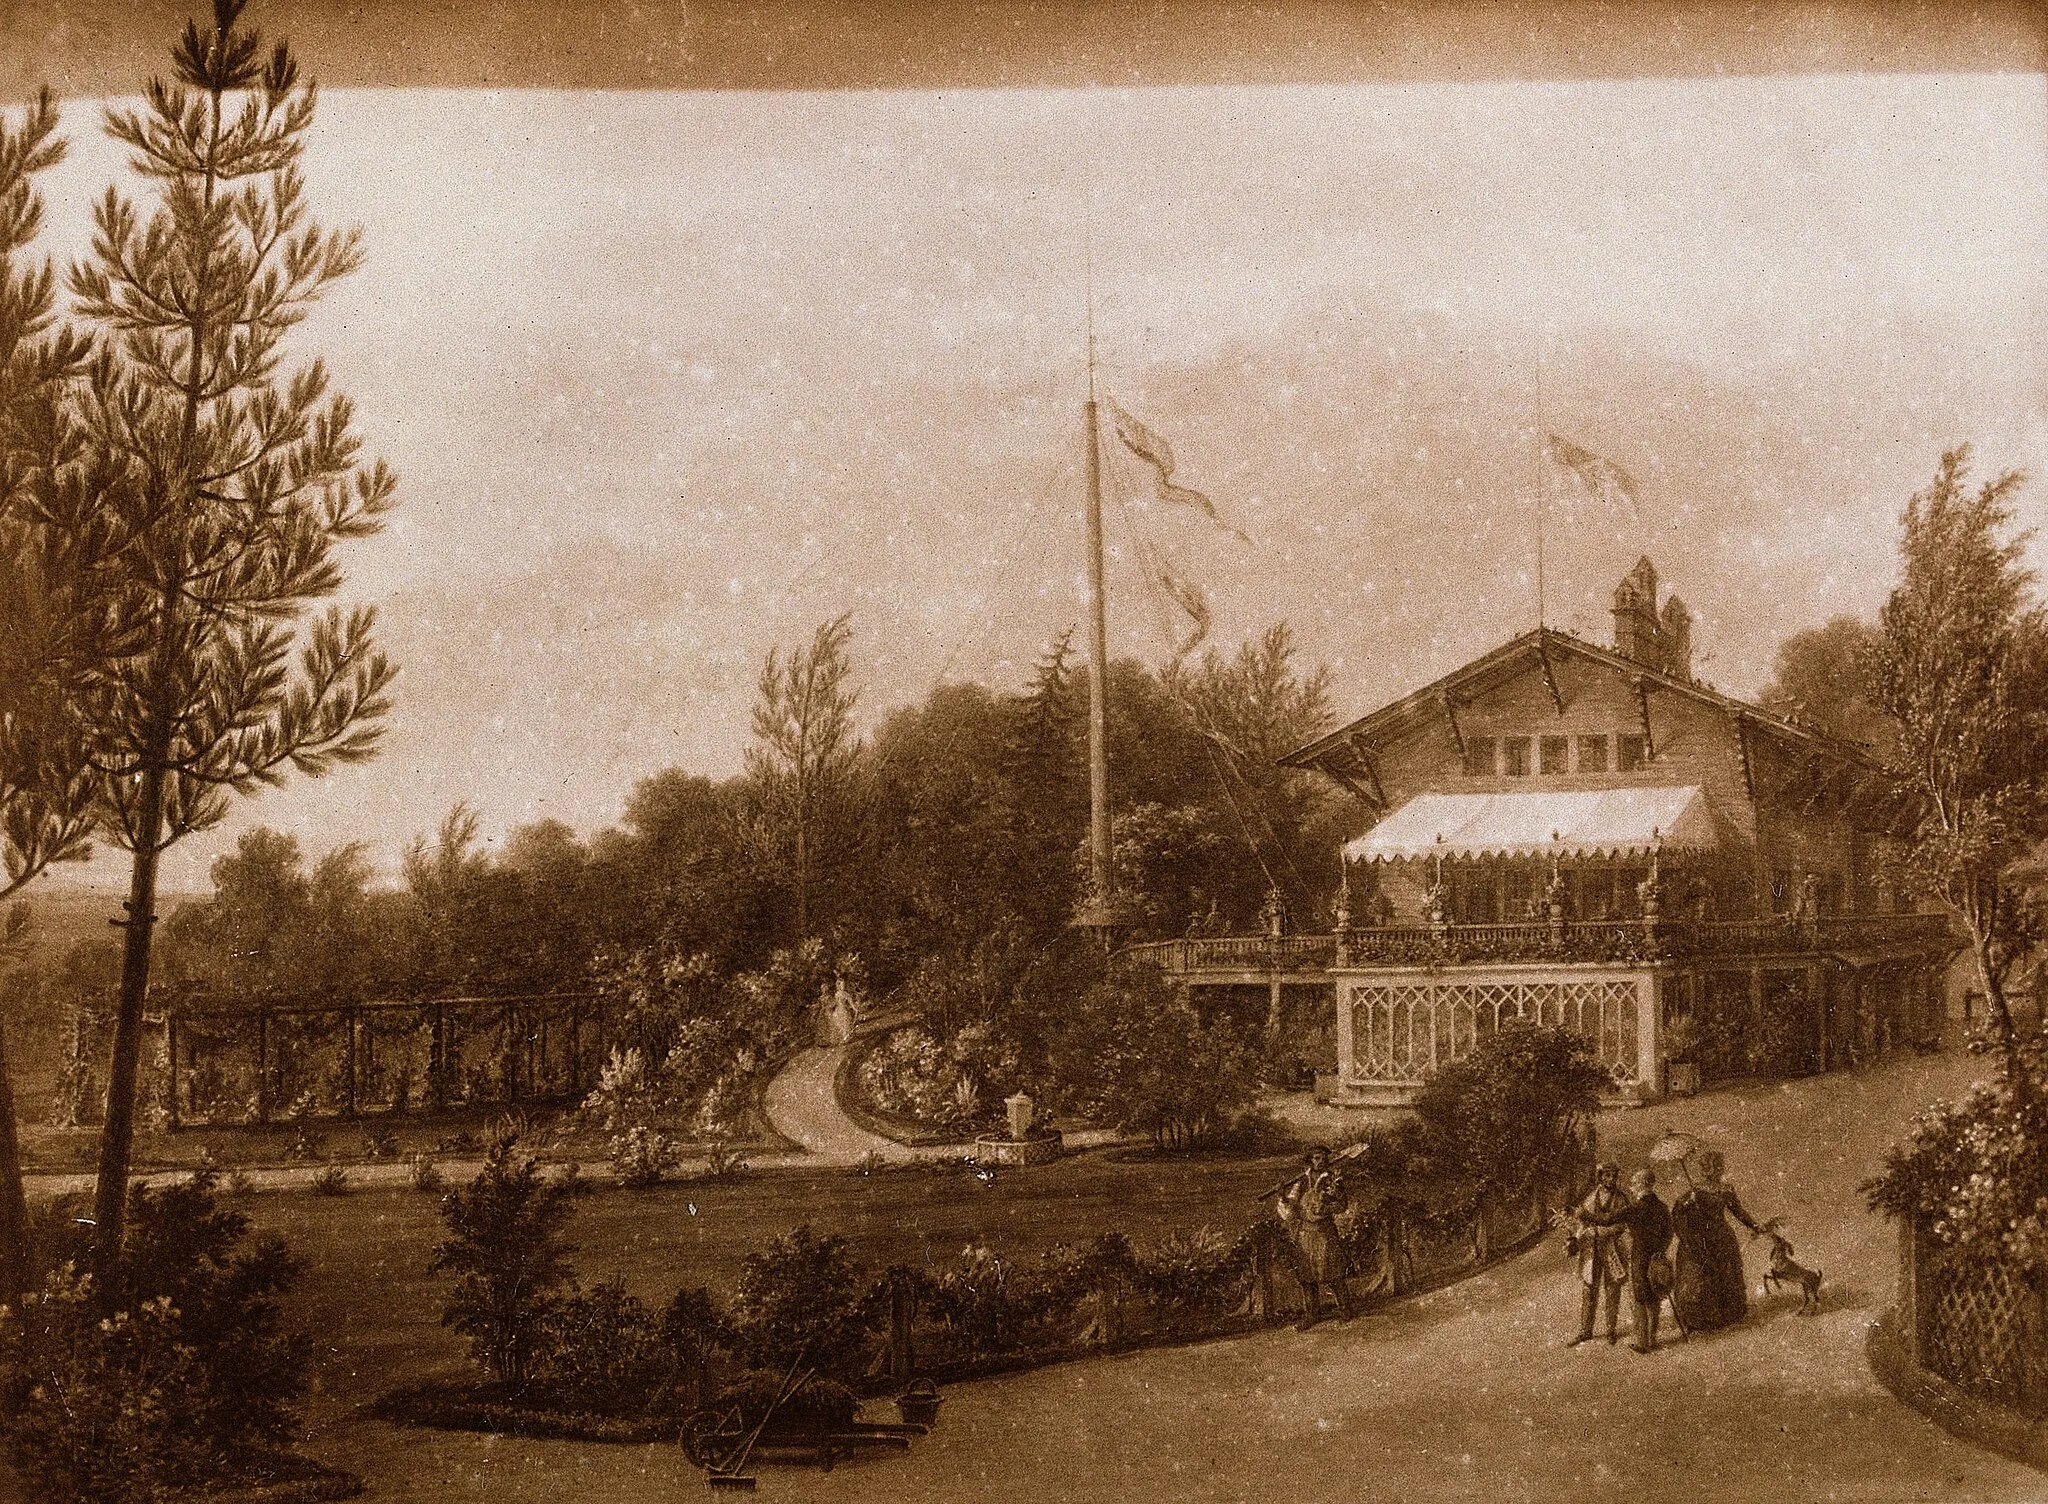 Photo showing: Favourite home of Alexandre Brongniart, in Bézu St. Eloi, Eure; Brongniart depicted in the foreground, holding a walking stick and a hat. Photoprint.

Iconographic Collections
Keywords: Alexandre Brongniart